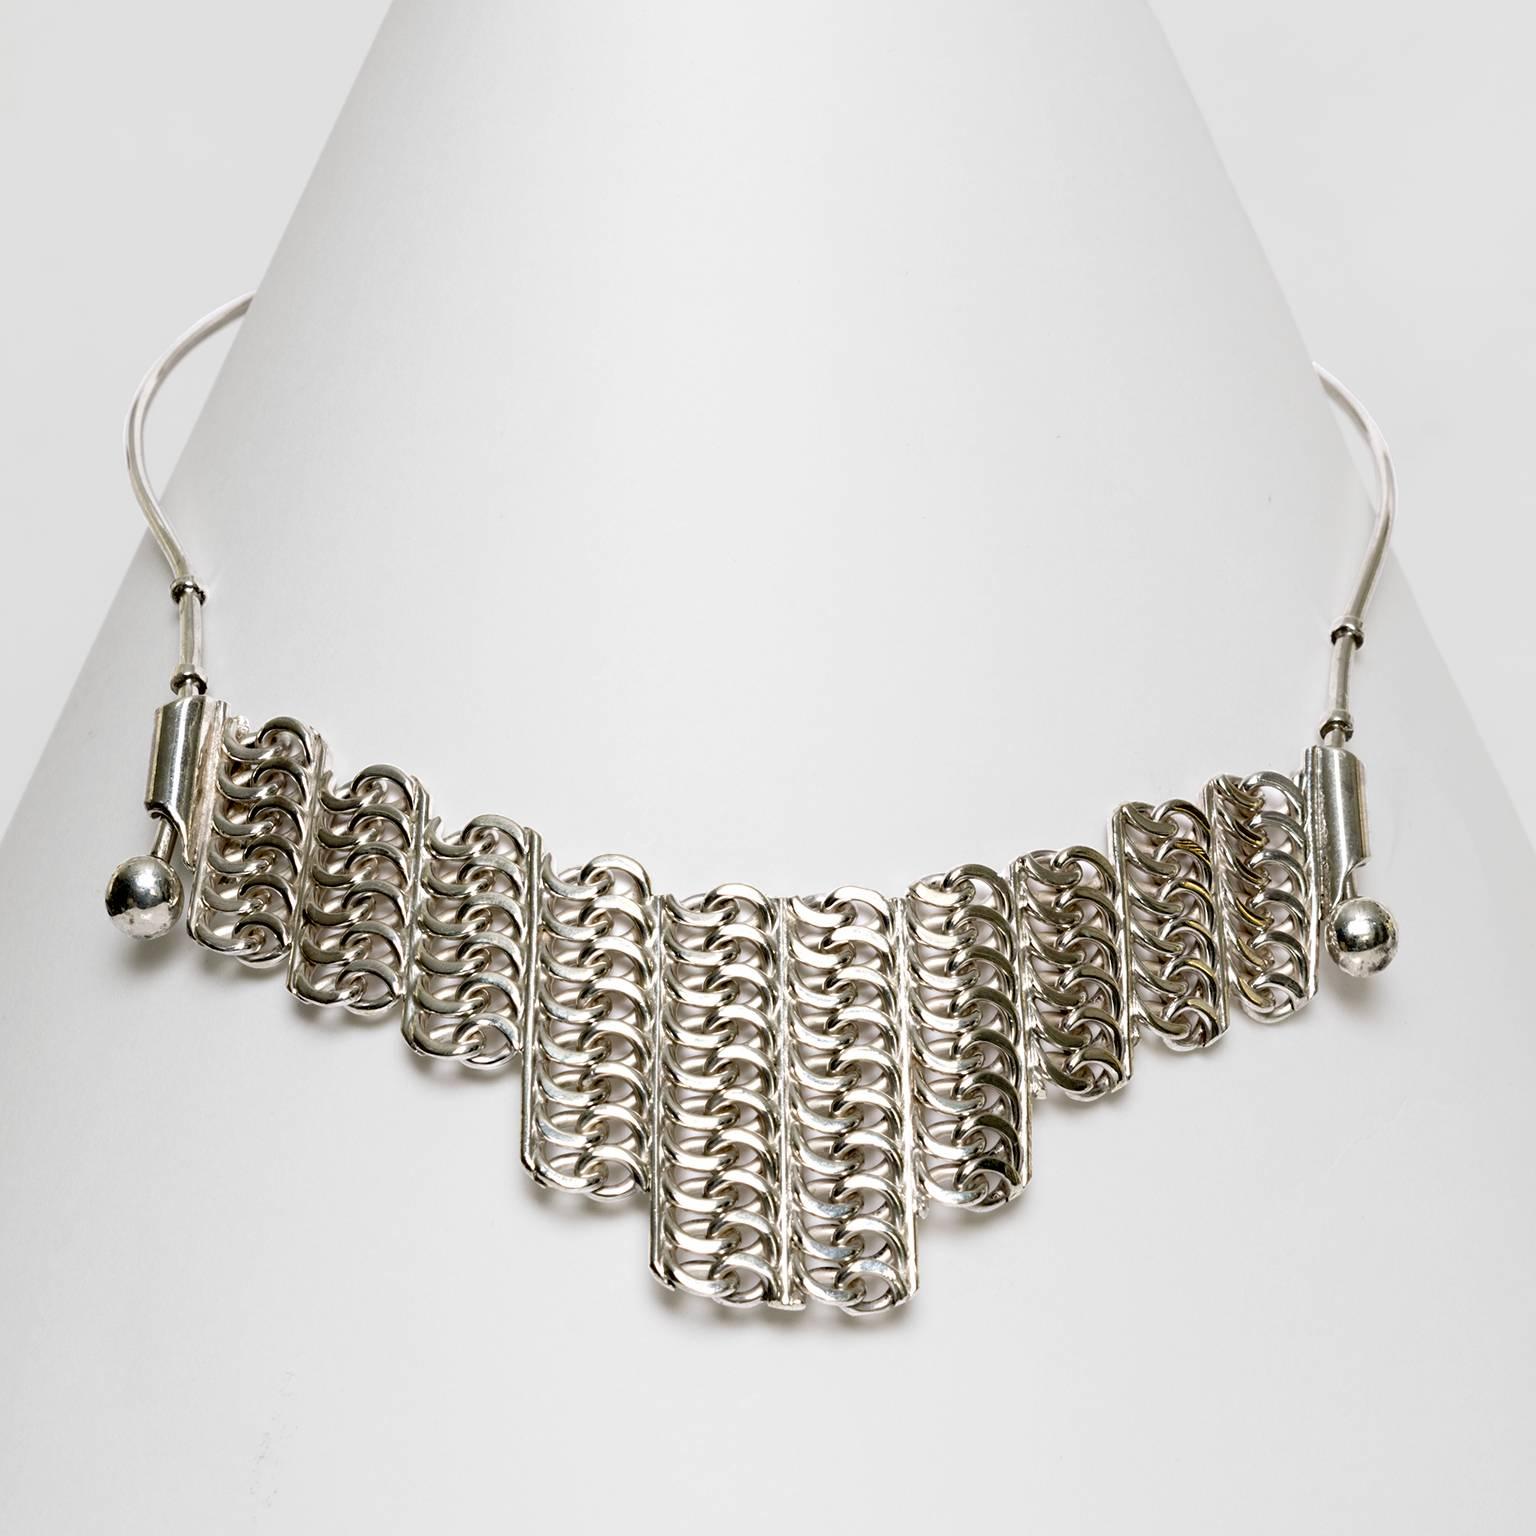 A Scandinavian modern sterling silver necklace with adjustable panel. Made by S.G. Hellstrom, Gnesta, Sweden, 1965
 
Opening diameter: 5